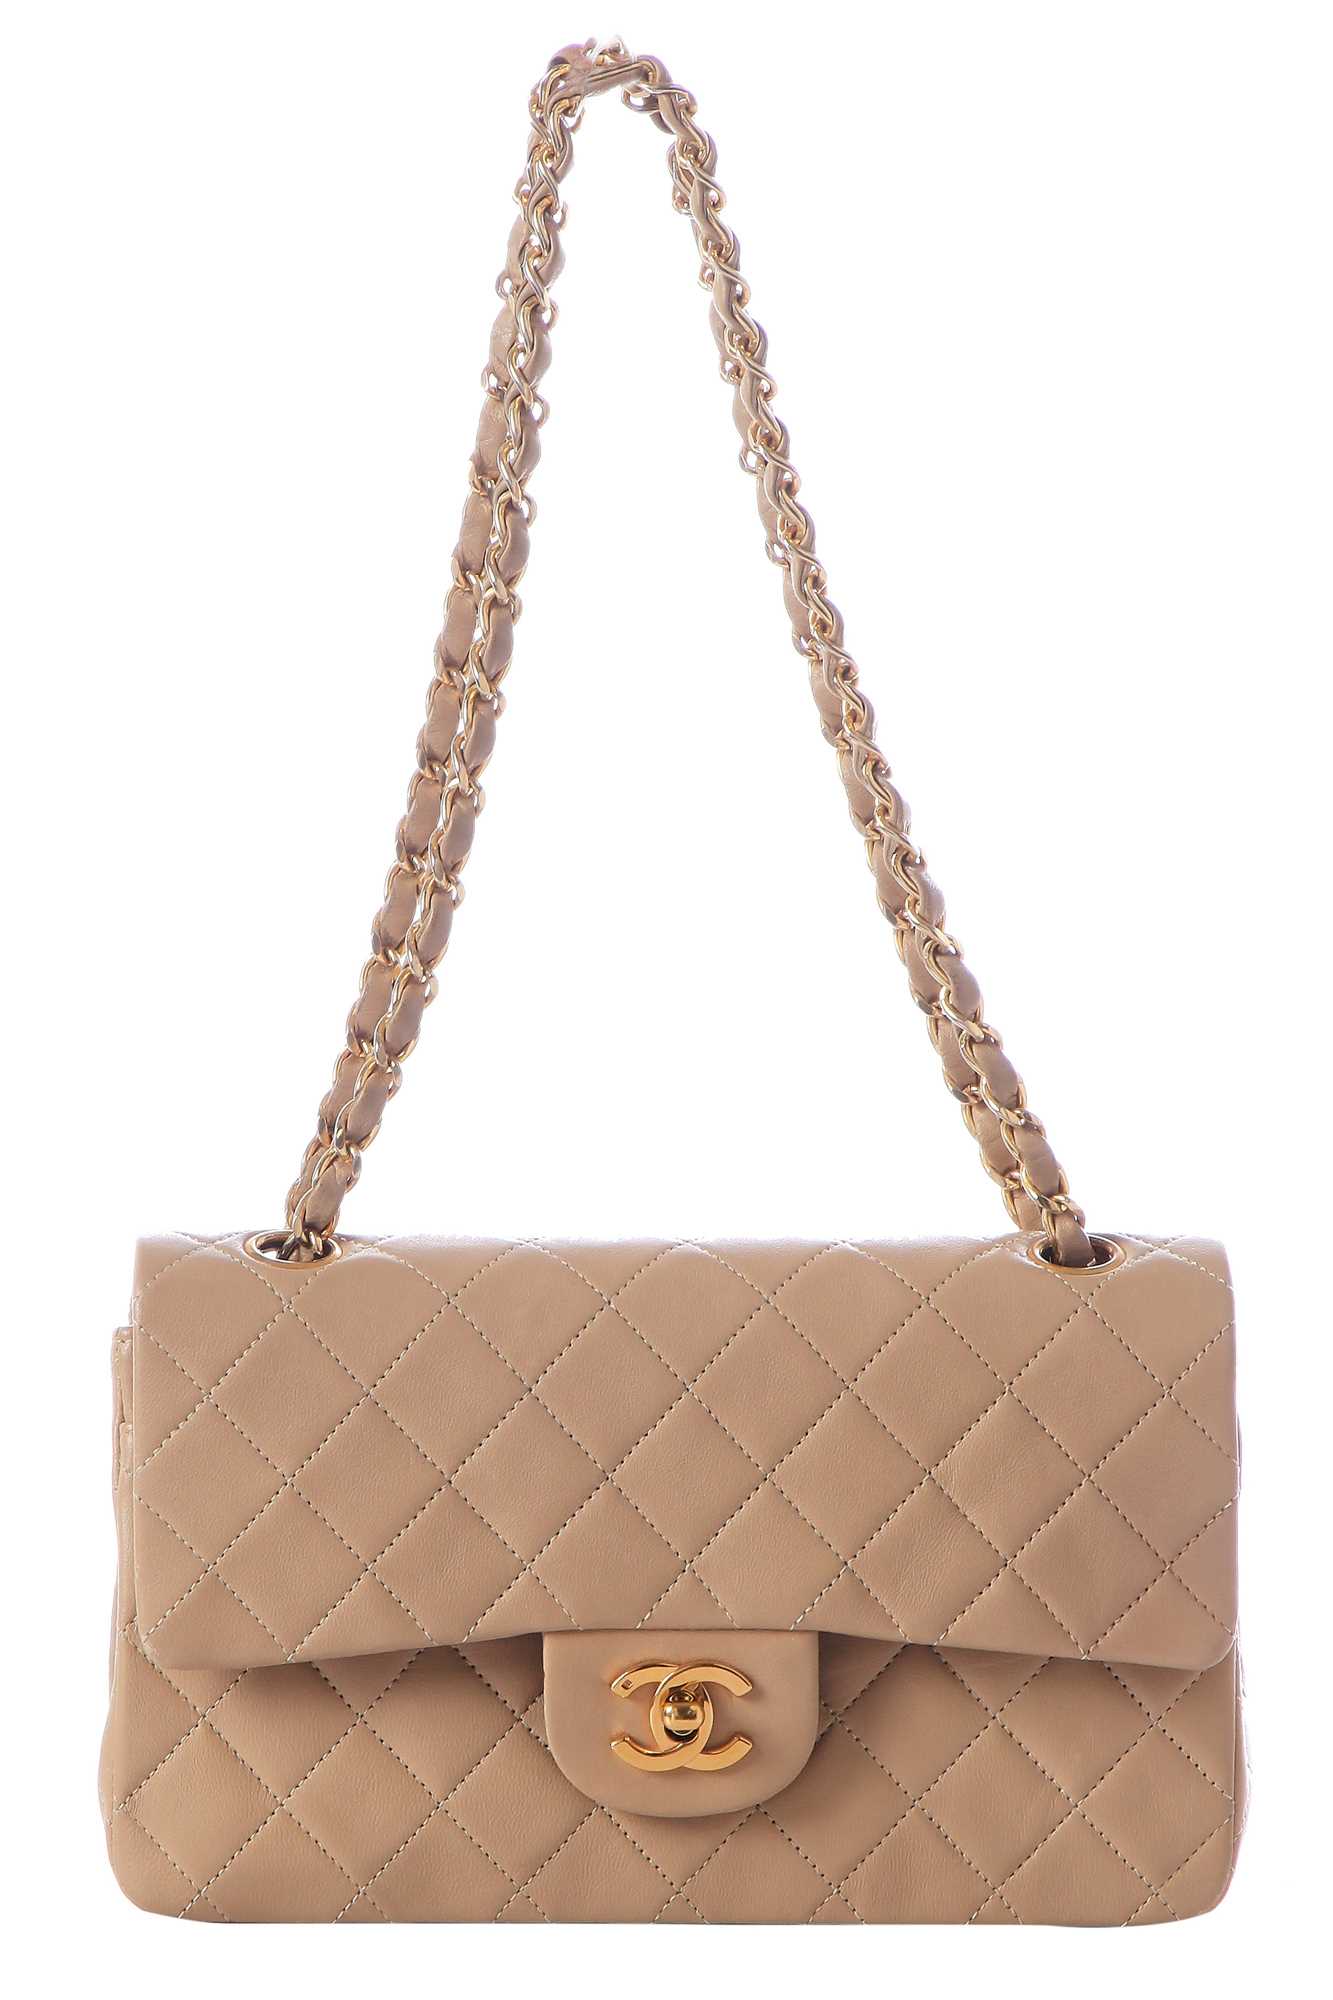 Chanel Pony Hair & Quilted Calfskin Dallas Saddle Bag Auction